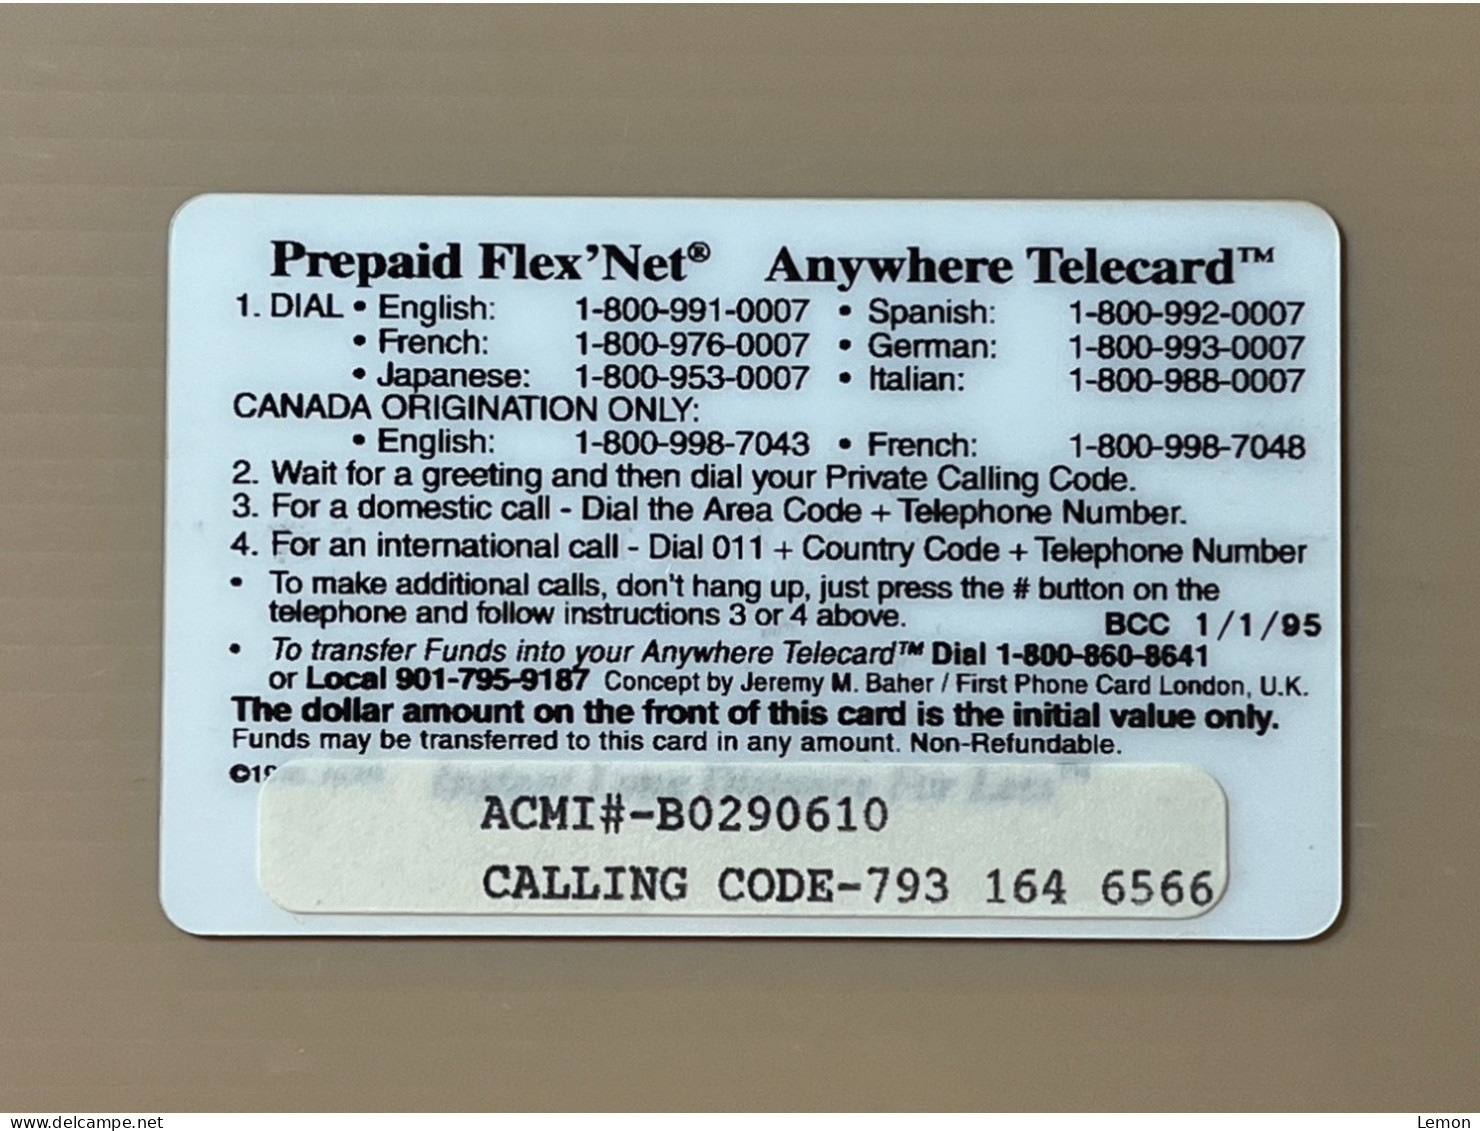 Mint USA UNITED STATES America Prepaid Telecard Phonecard, Stamp On Card, Set Of 1 Mint Card - Collections